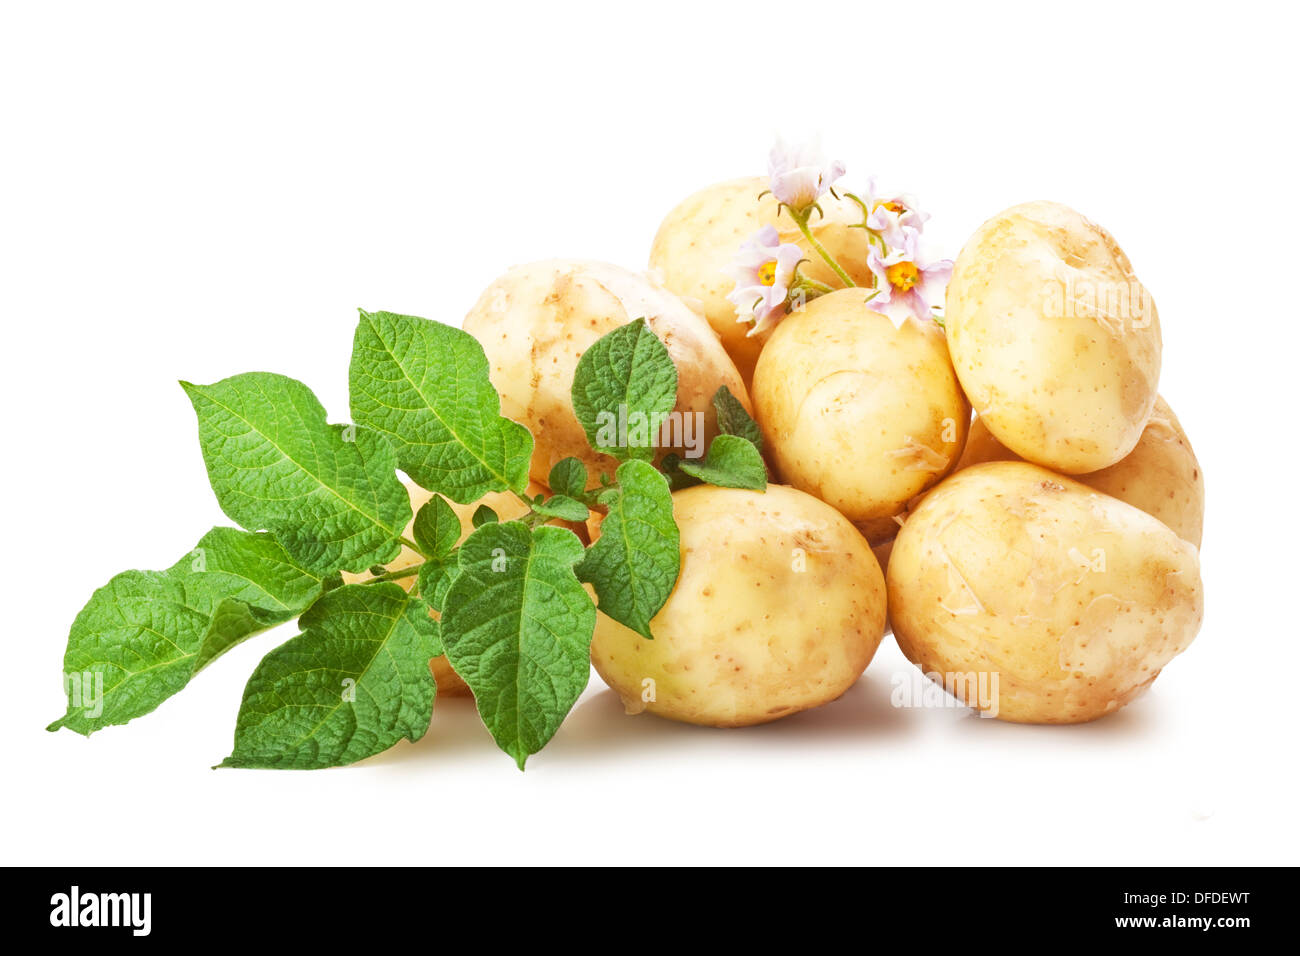 Heap of ripe potatoes vegetable with green leafs isolated on white background Stock Photo